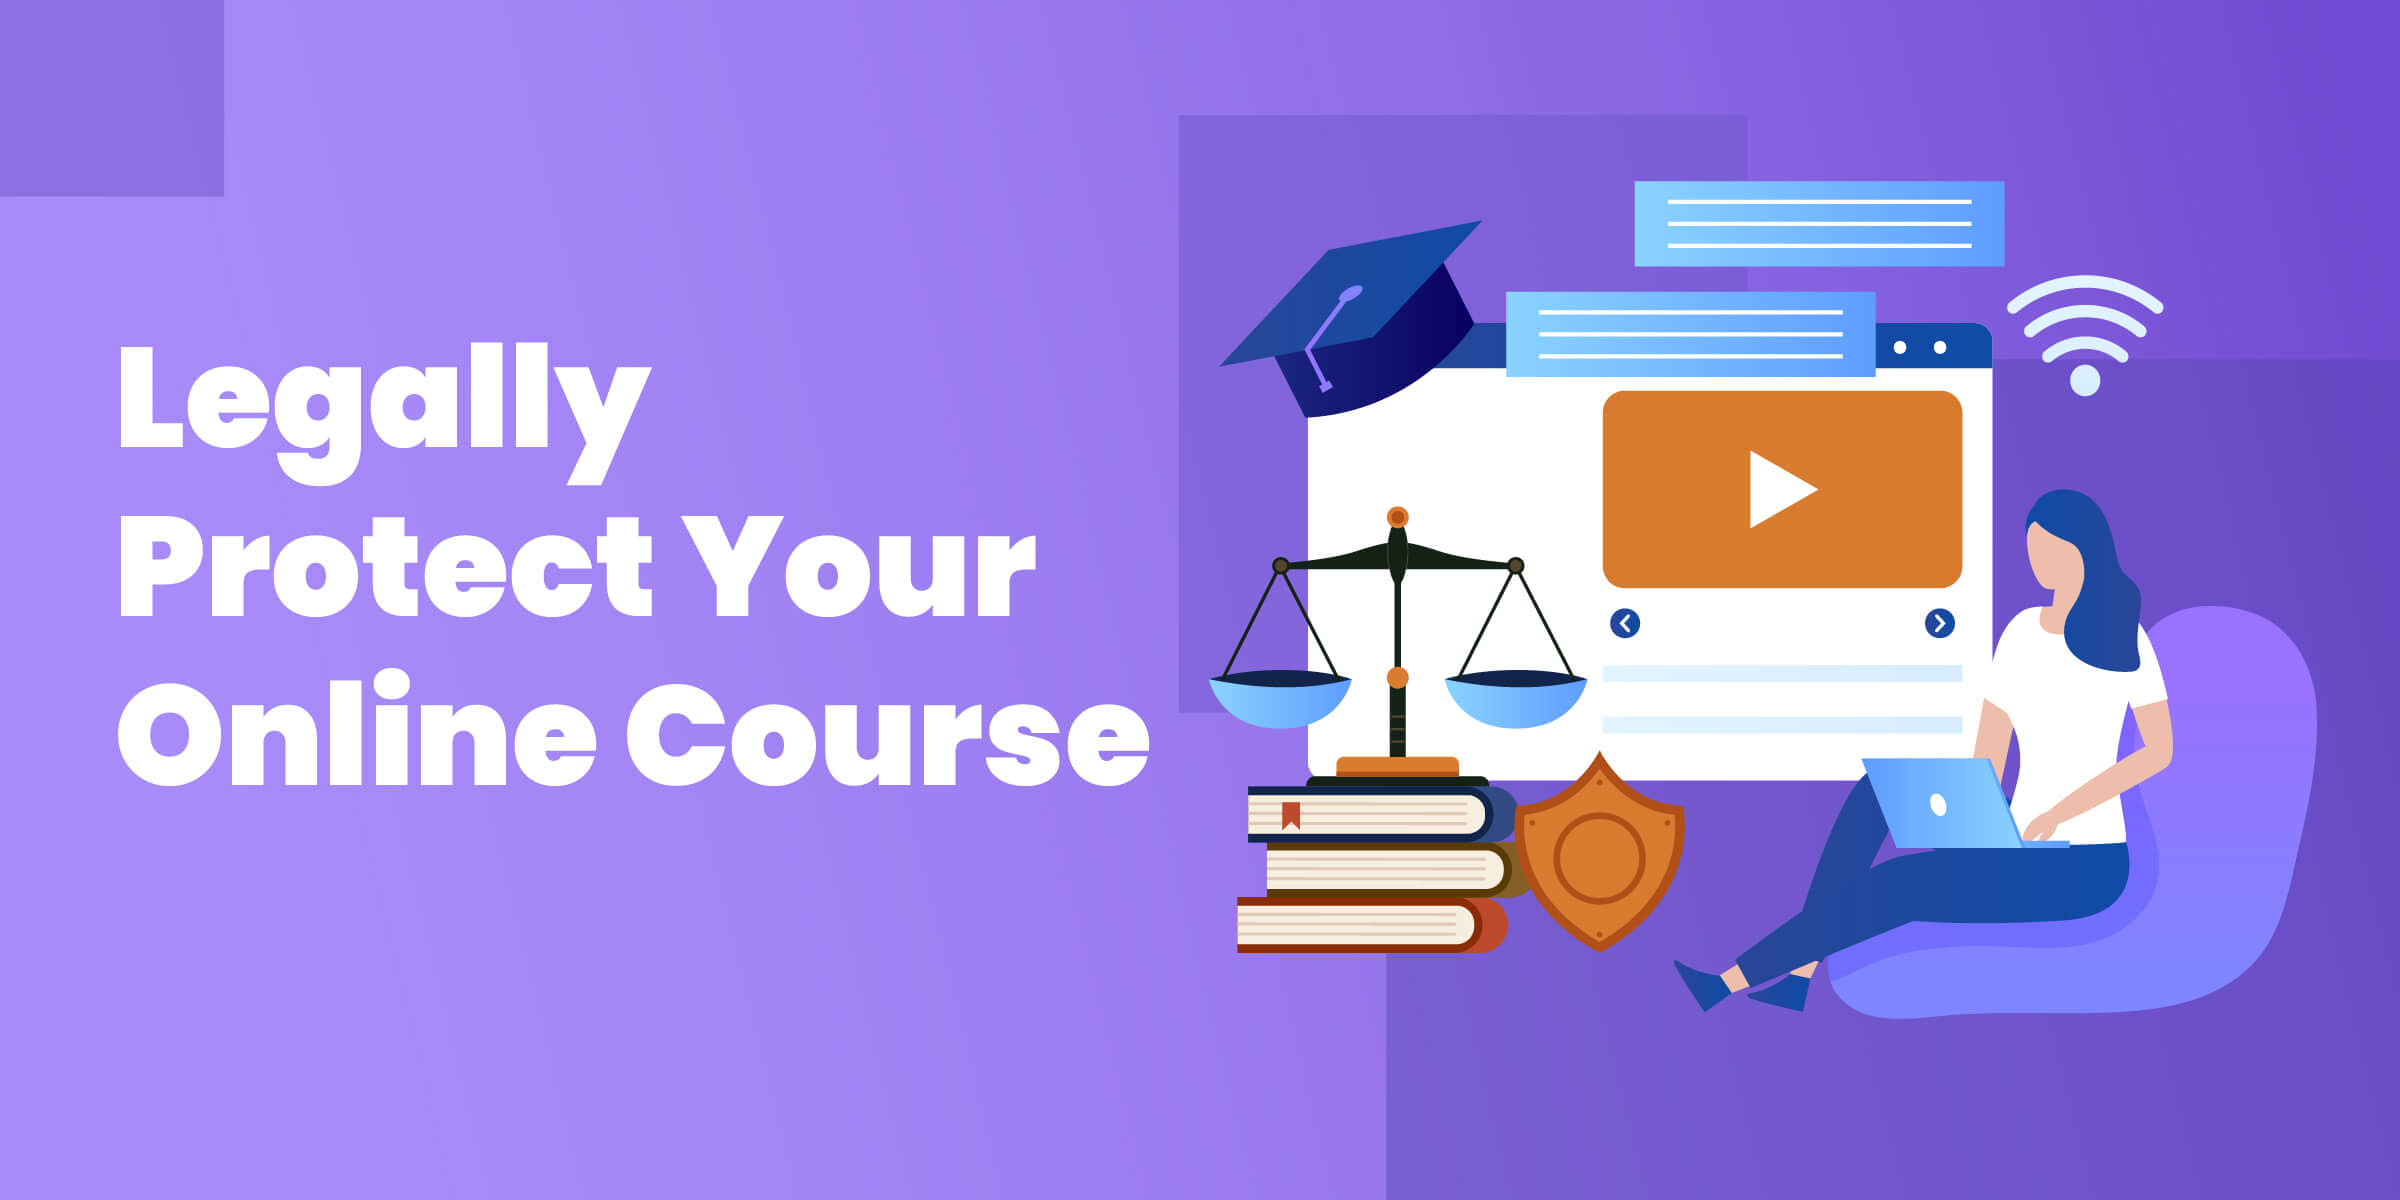 Legally Protect Your Online Course